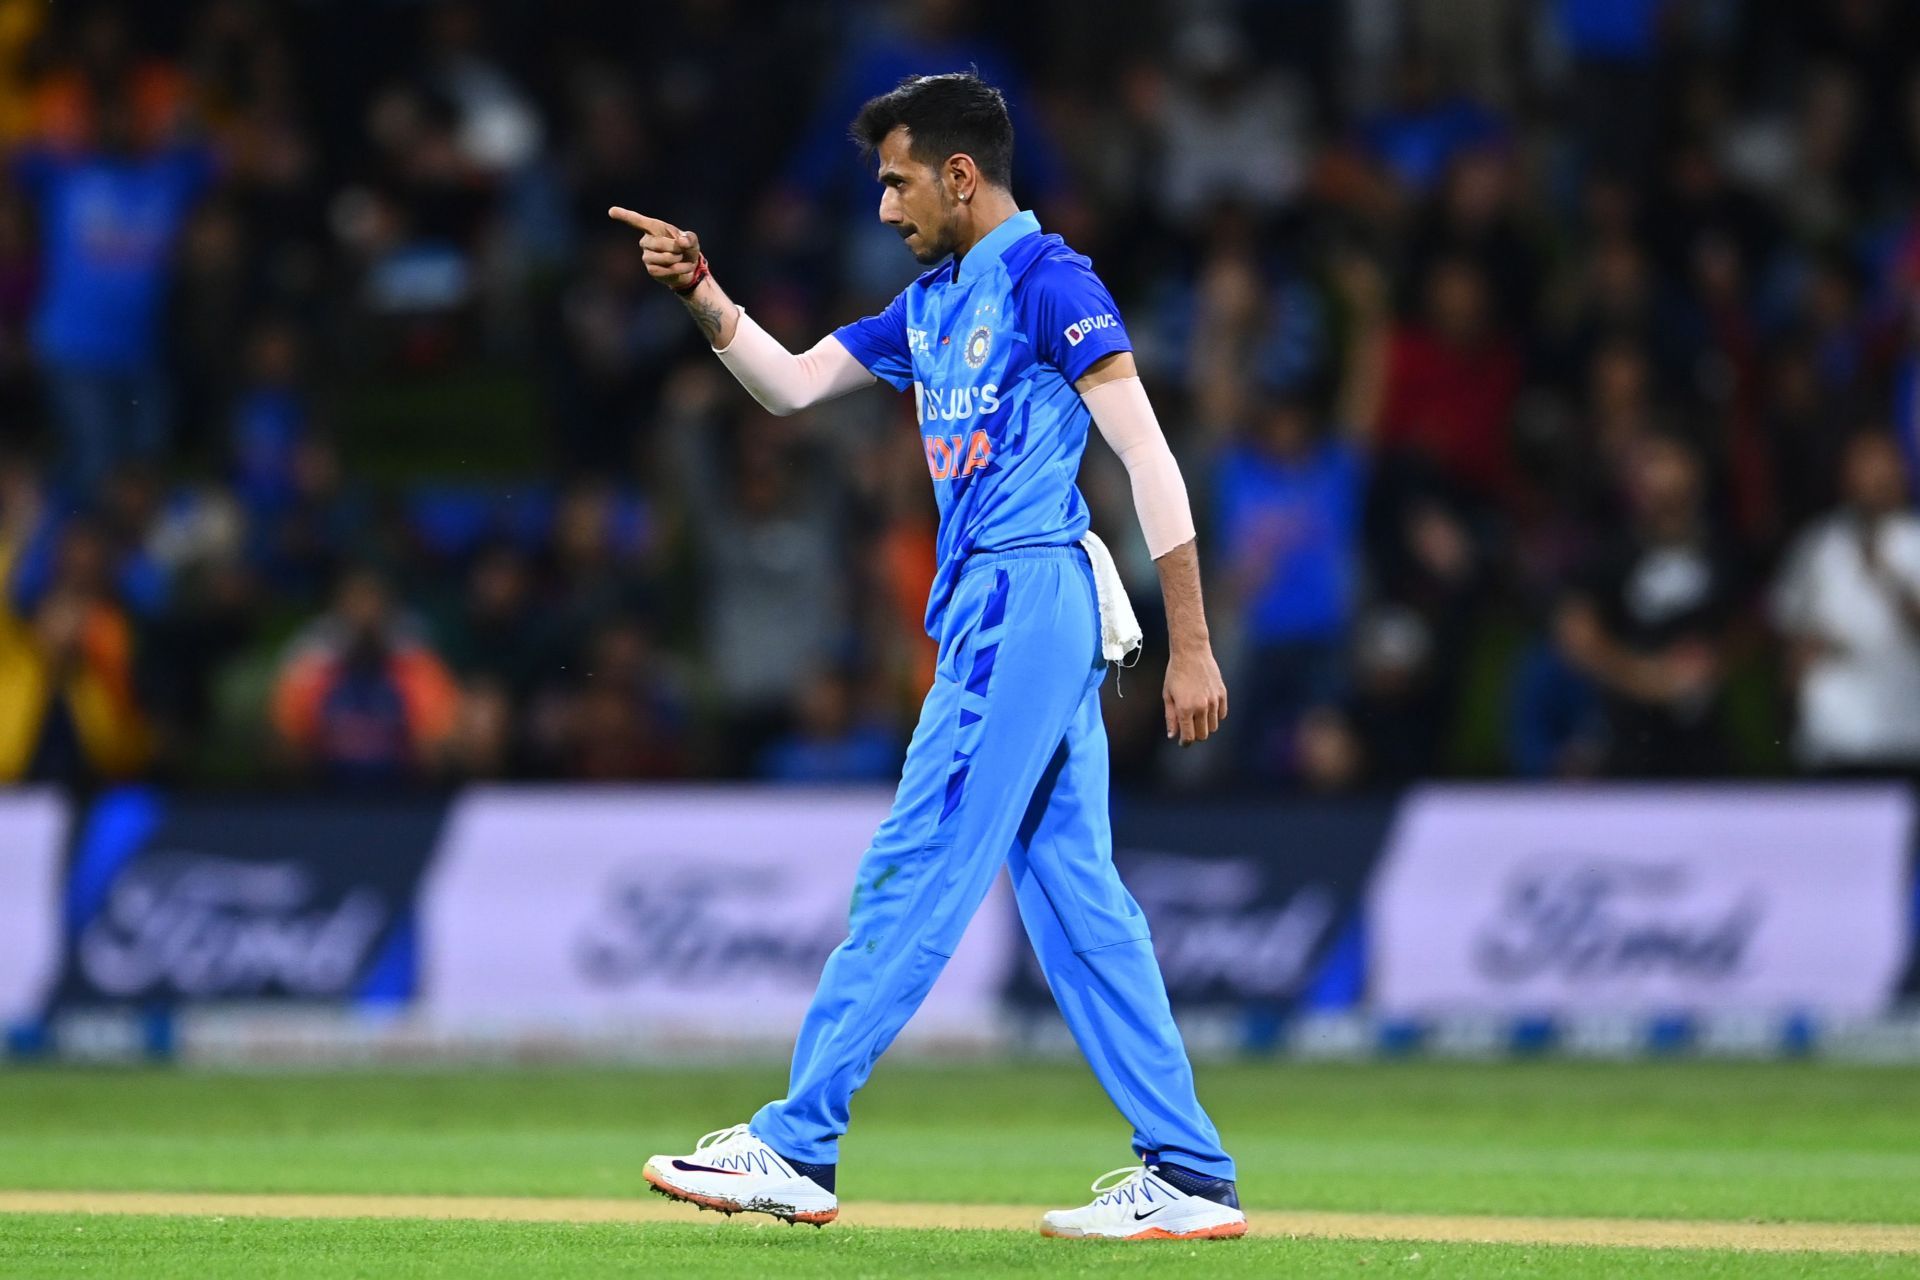 Yuzvendra Chahal picked up two wickets in the second T20I.